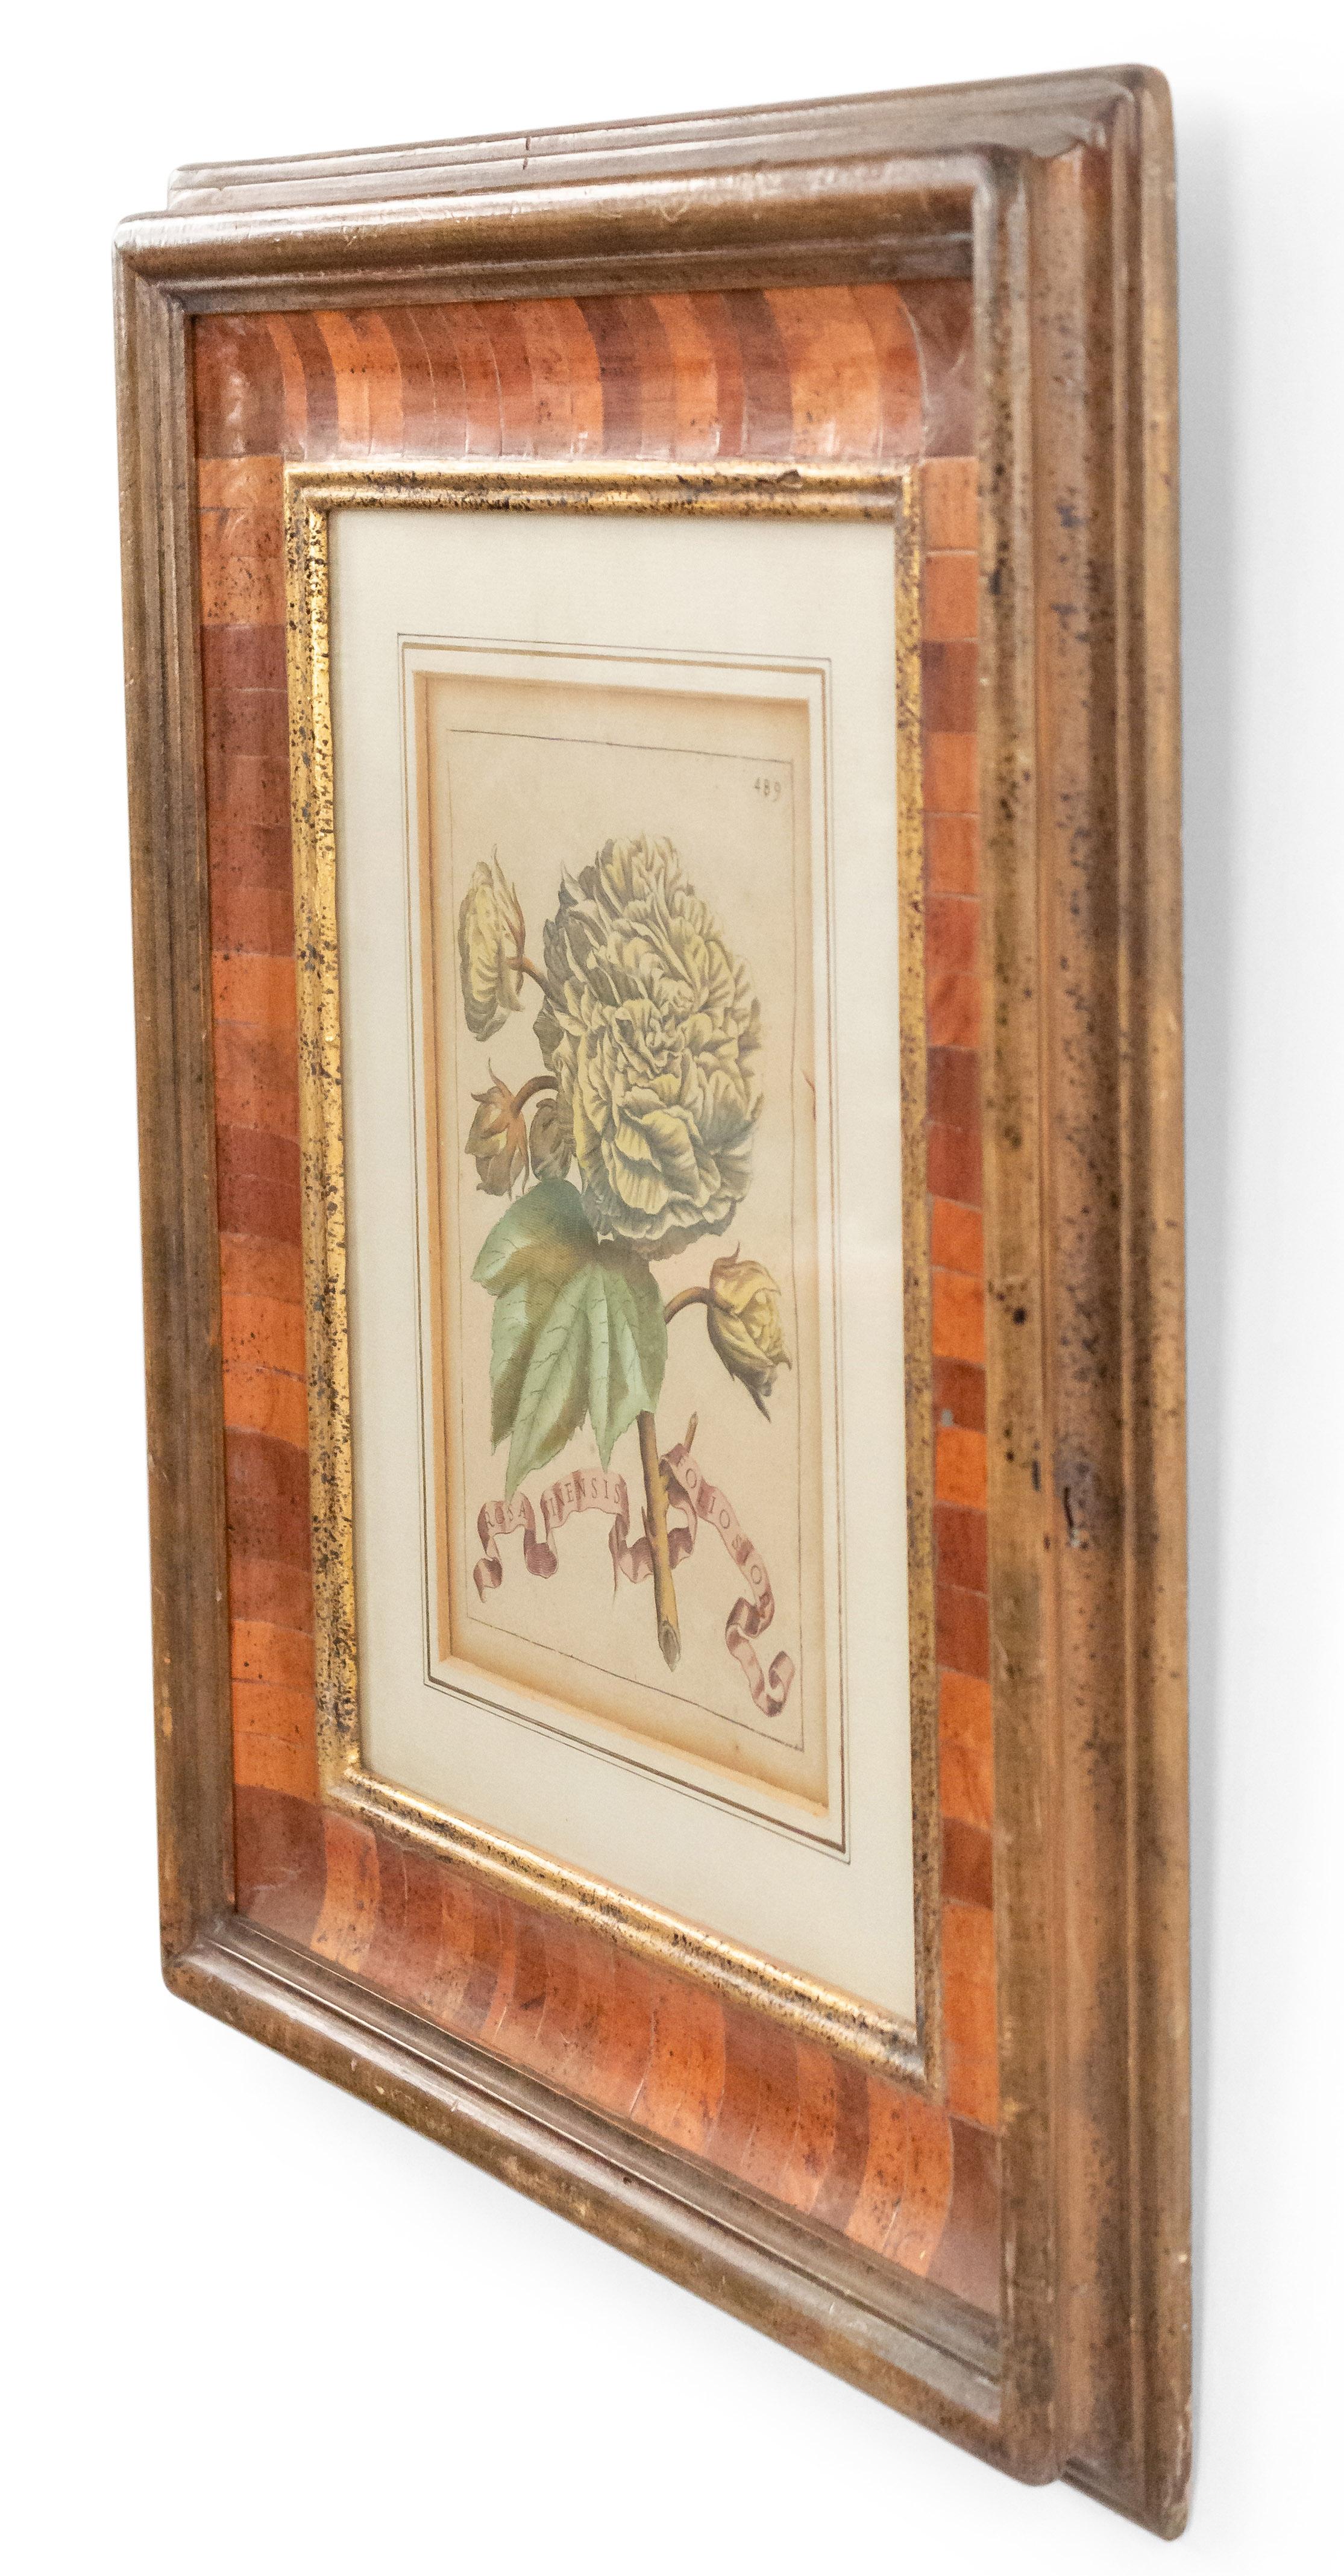 Paper 19th Century Italian Hand Colored Engraving of Flowers in an Inlaid Frame For Sale